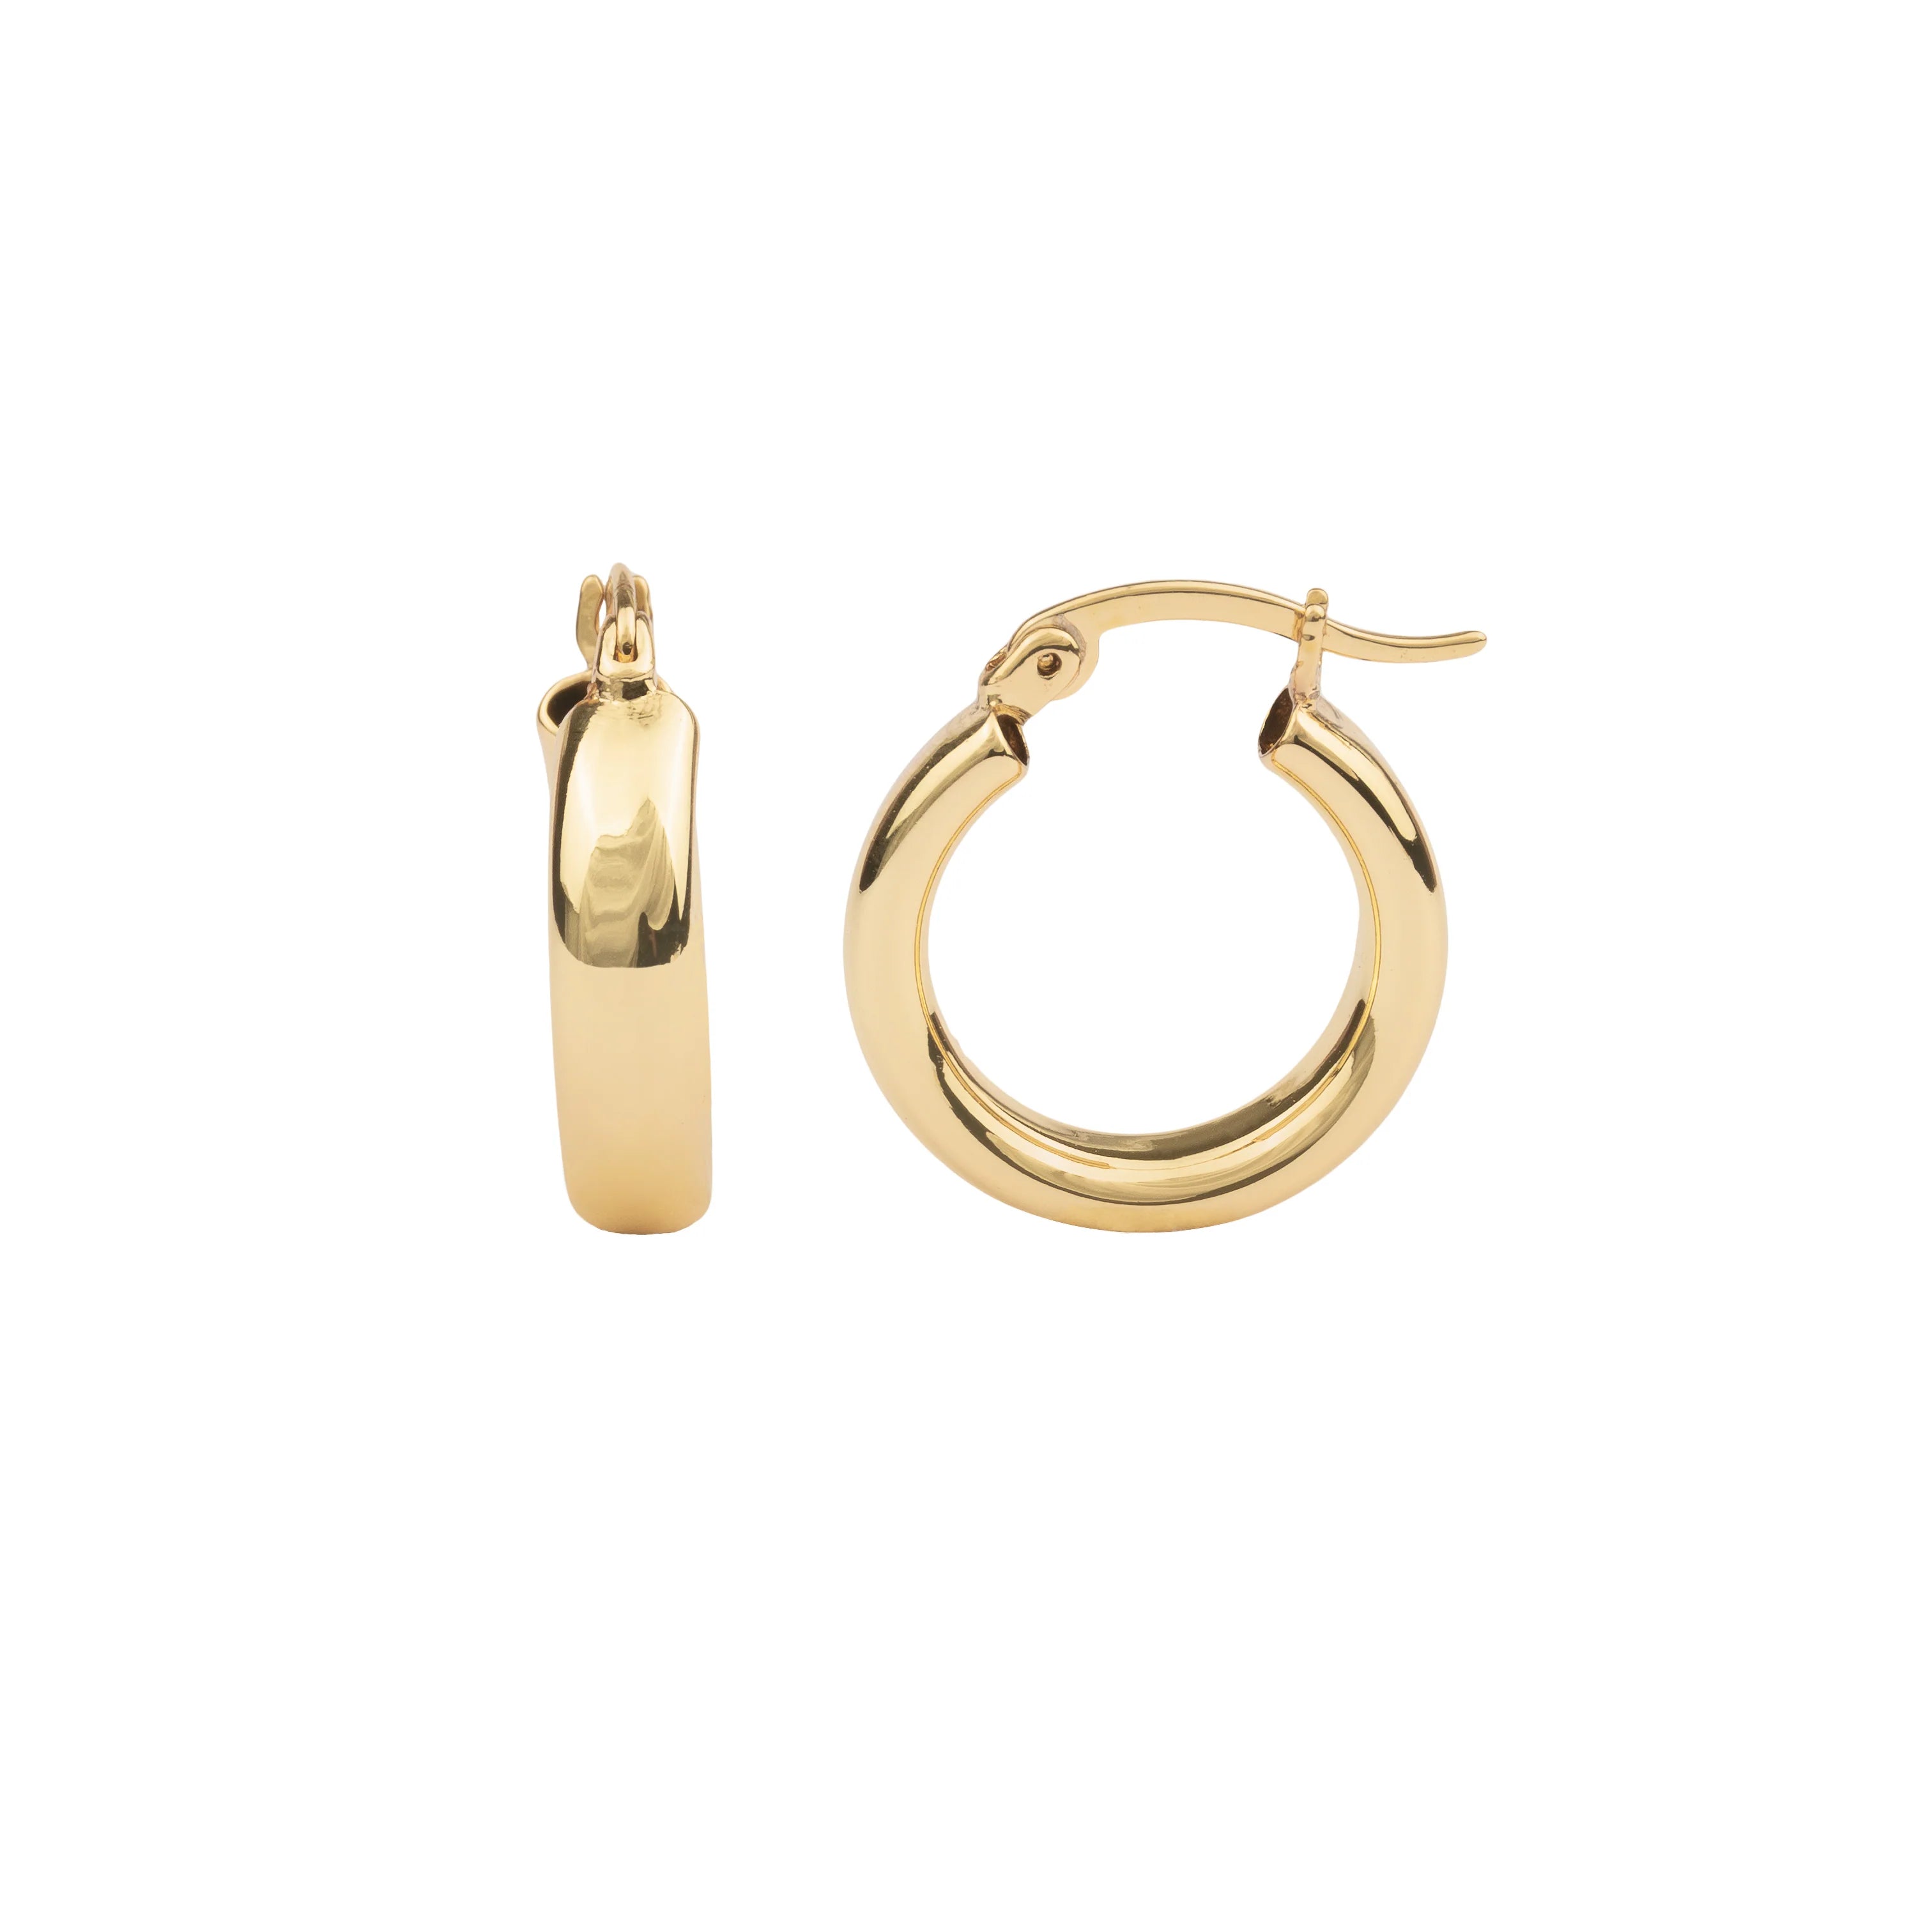 Small Gold Plain hoops